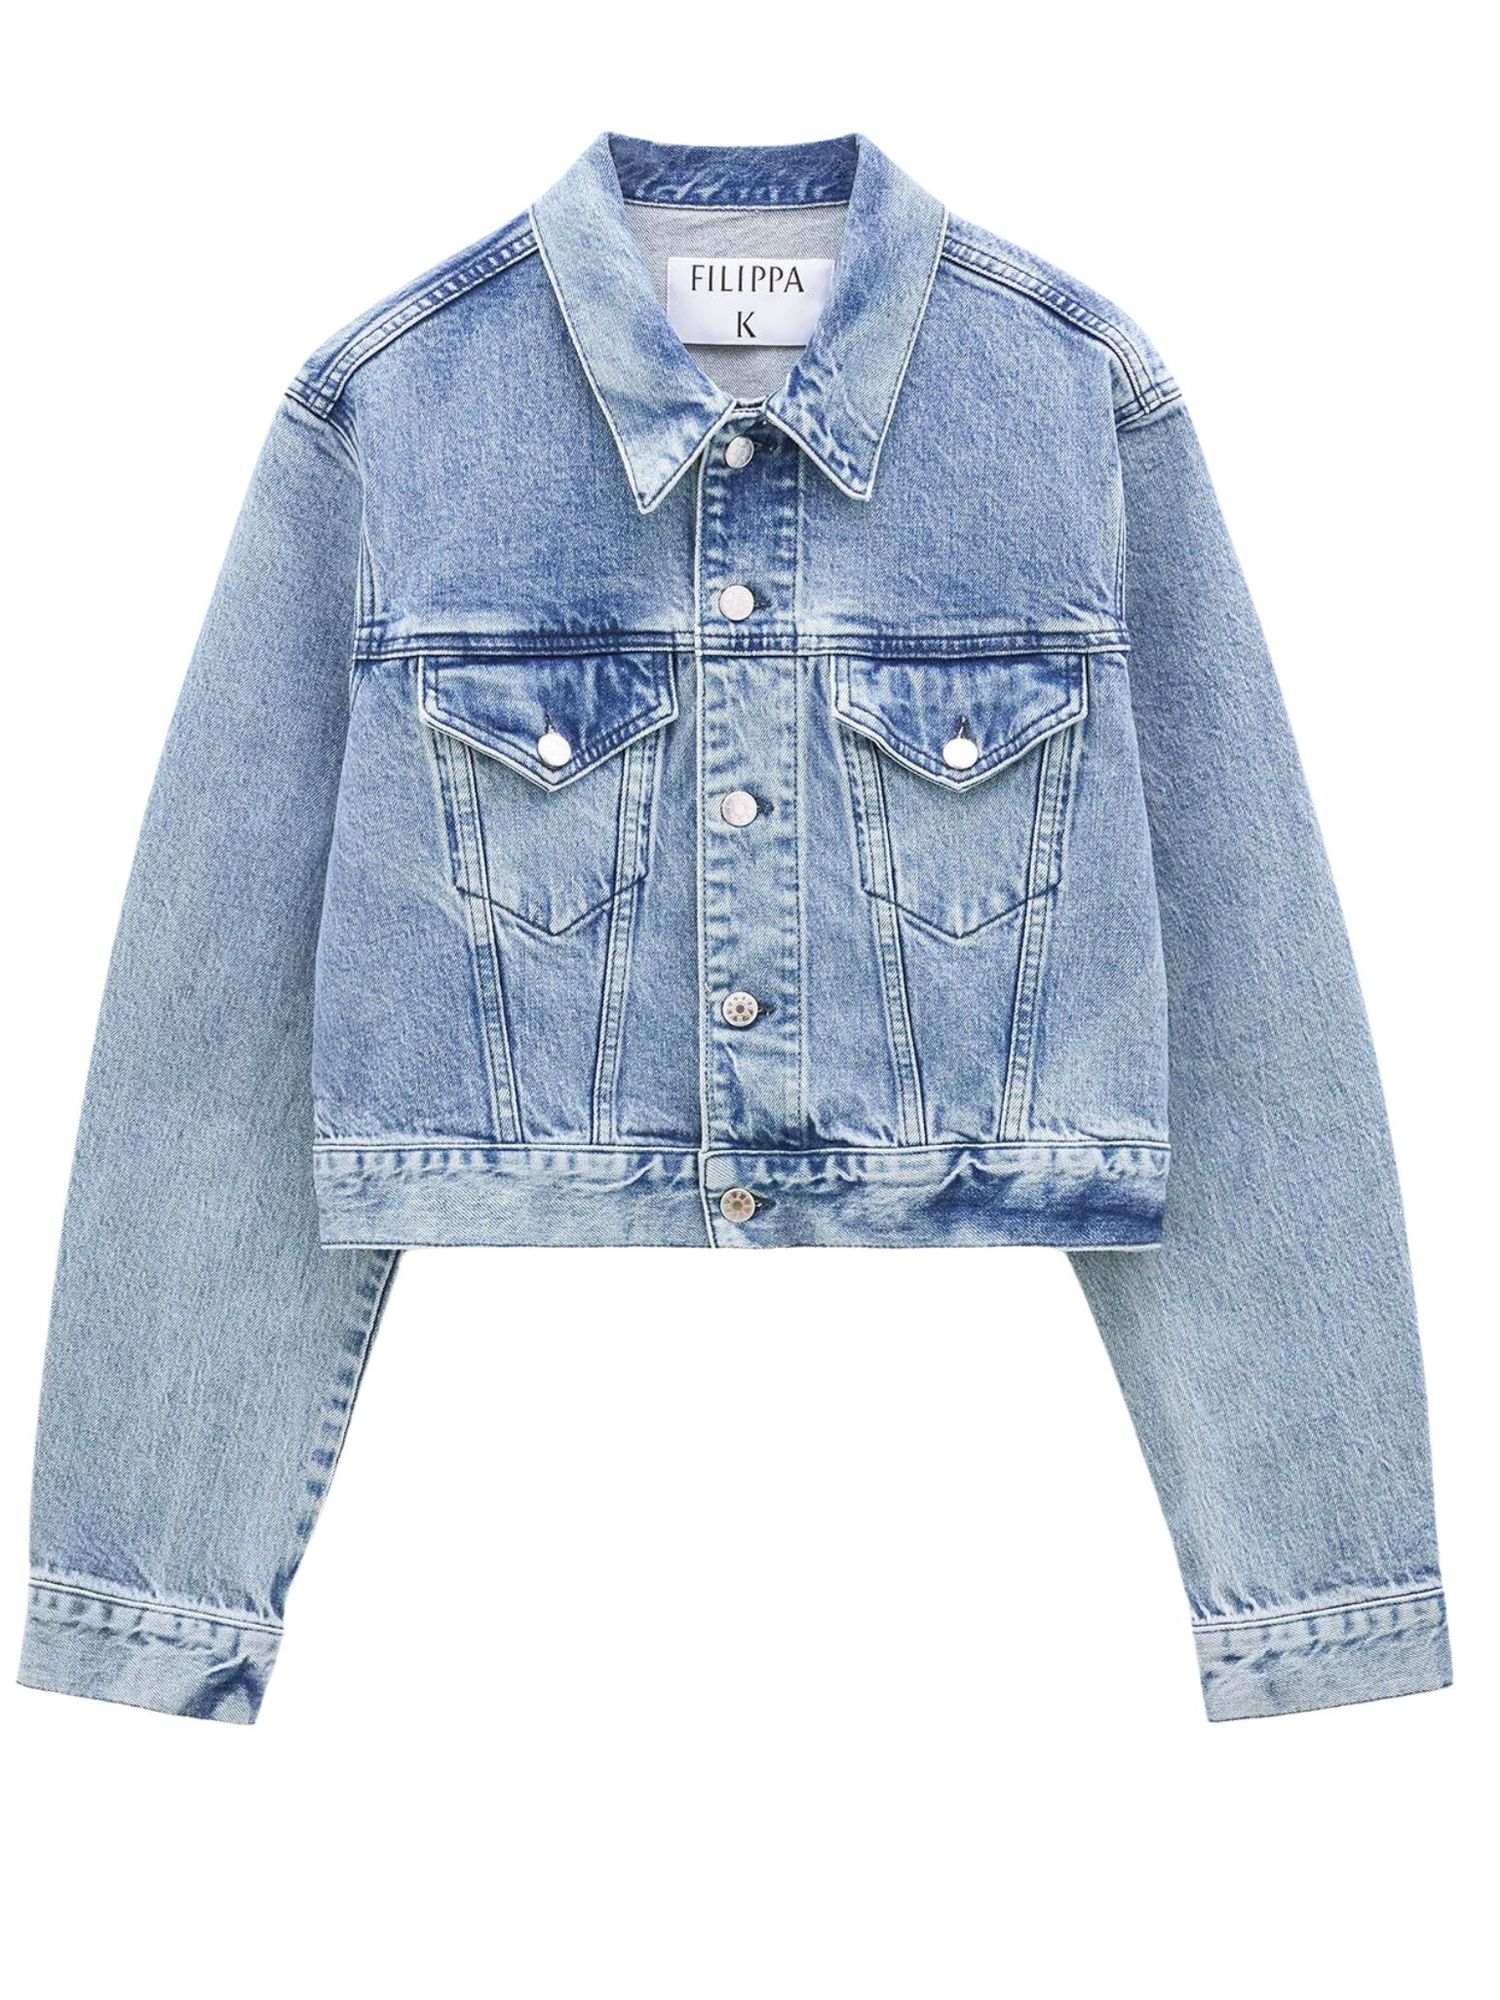 These are the 15 best denim jackets to don now - Vogue Scandinavia